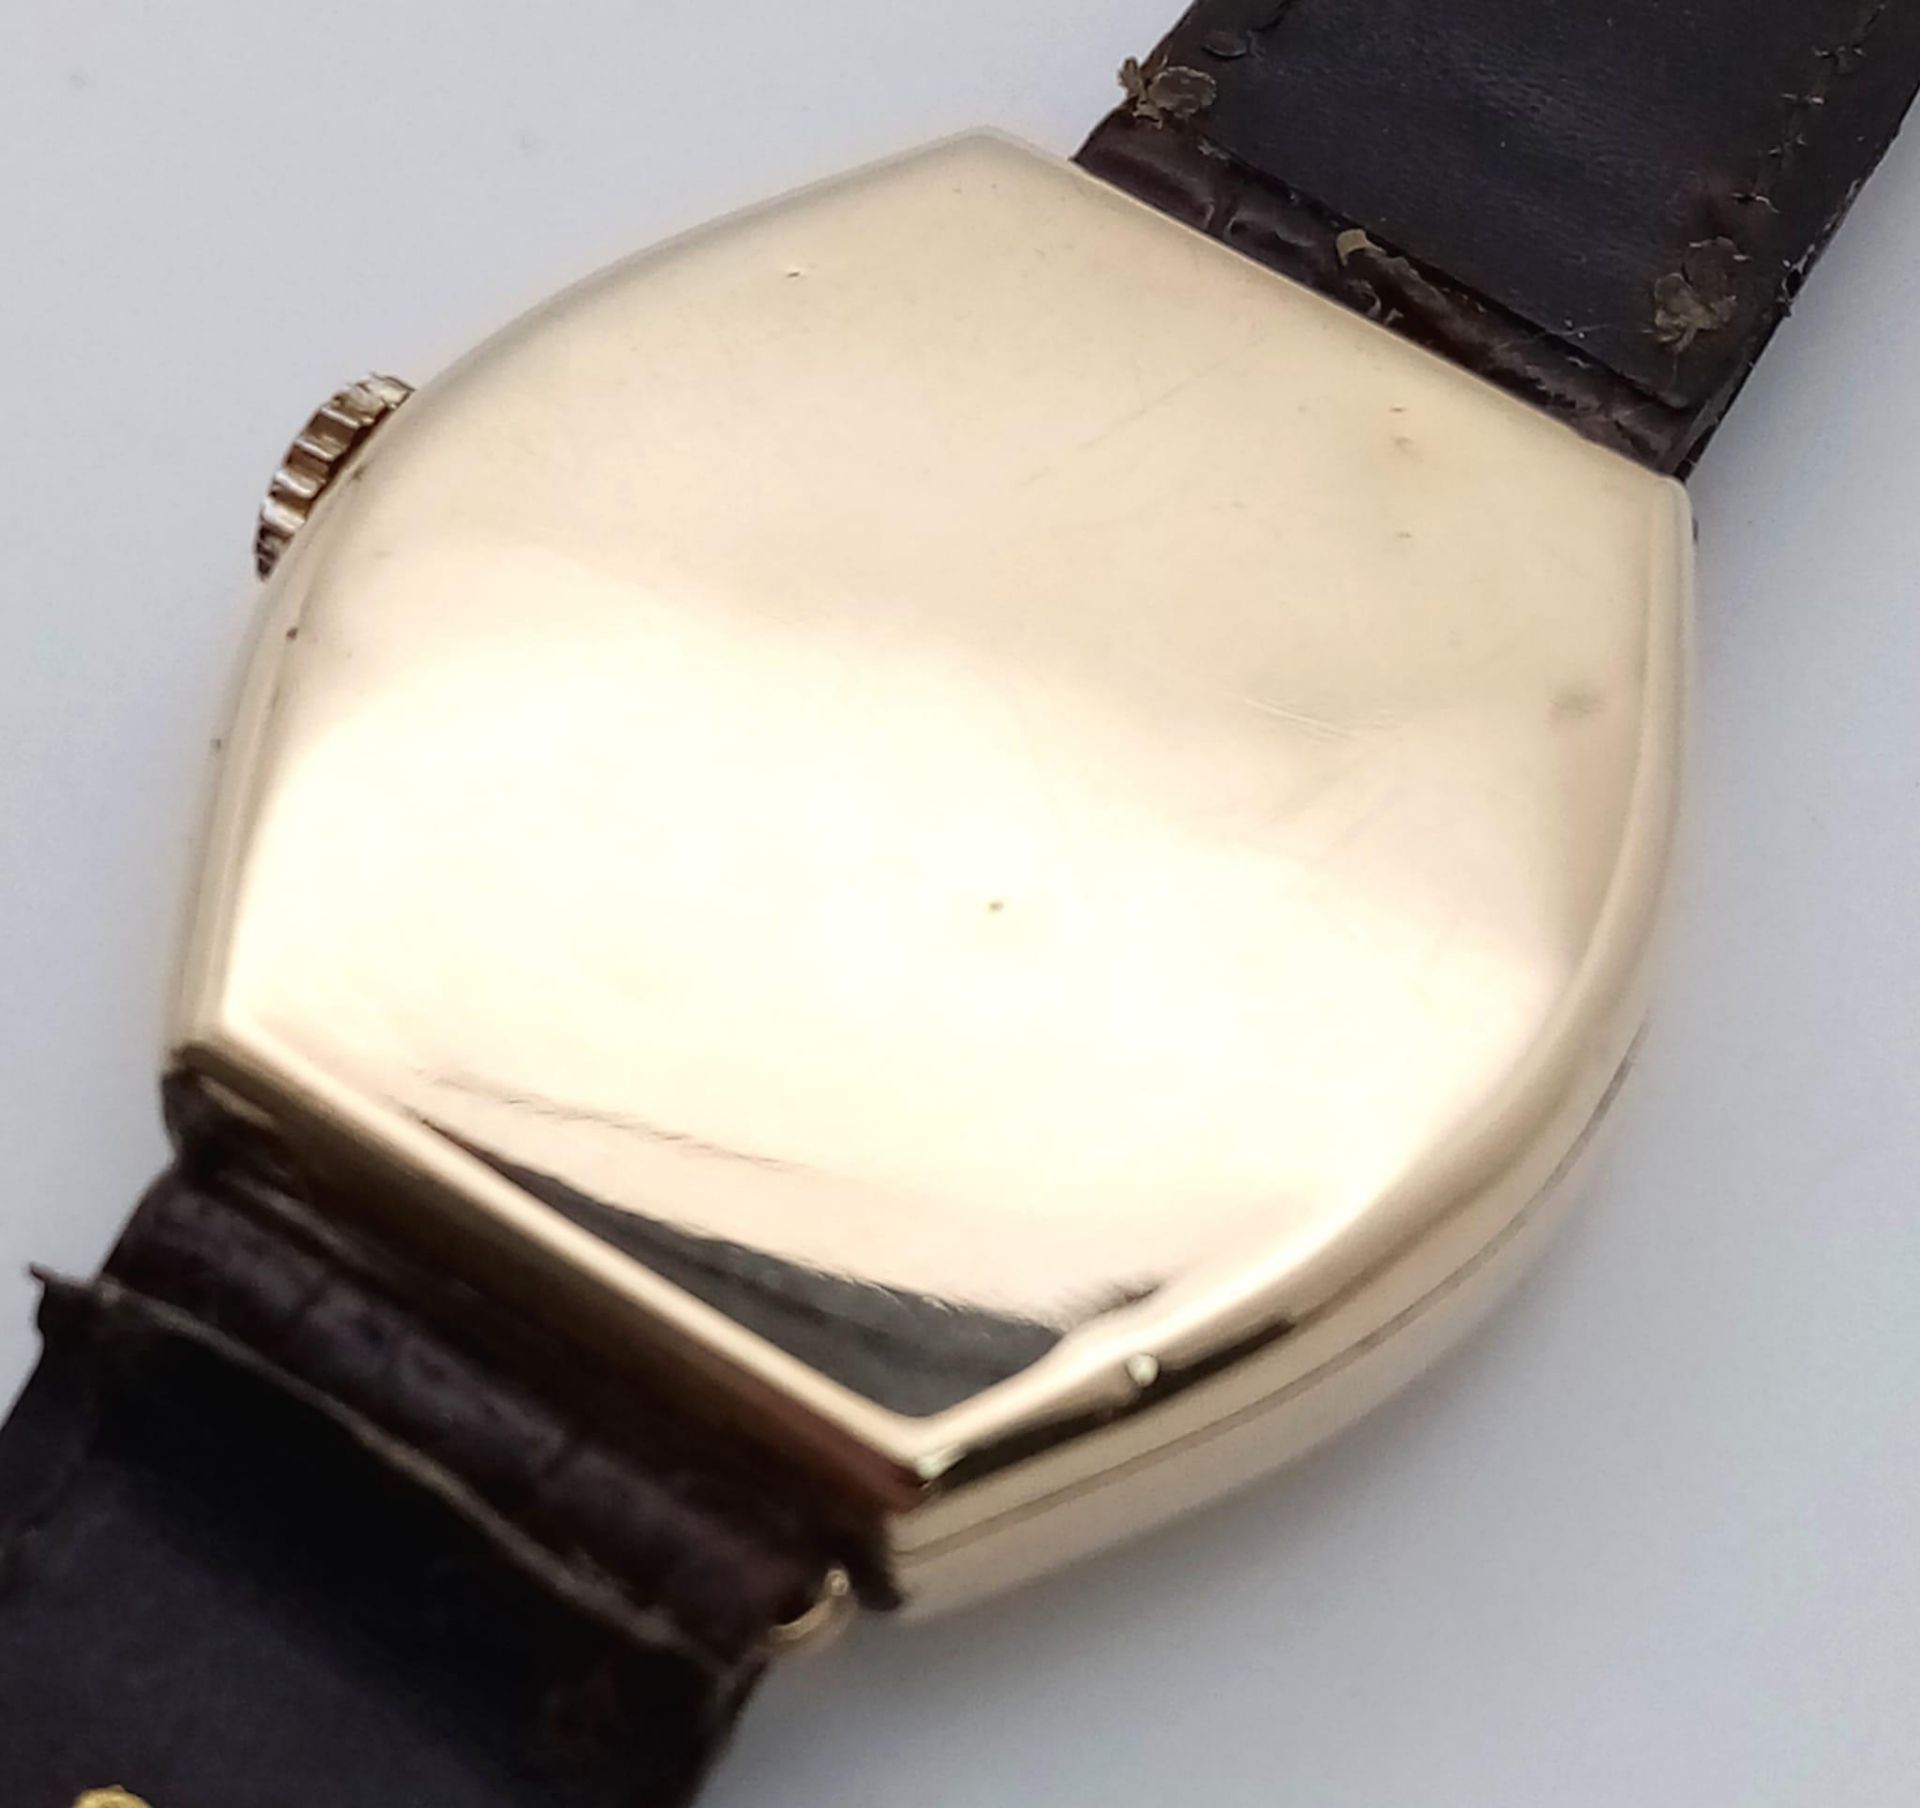 A Vintage 9K Yellow Gold Mechanical Ladies Watch. Brown leather strap. 9K Dennison gold case - 30mm. - Image 5 of 6